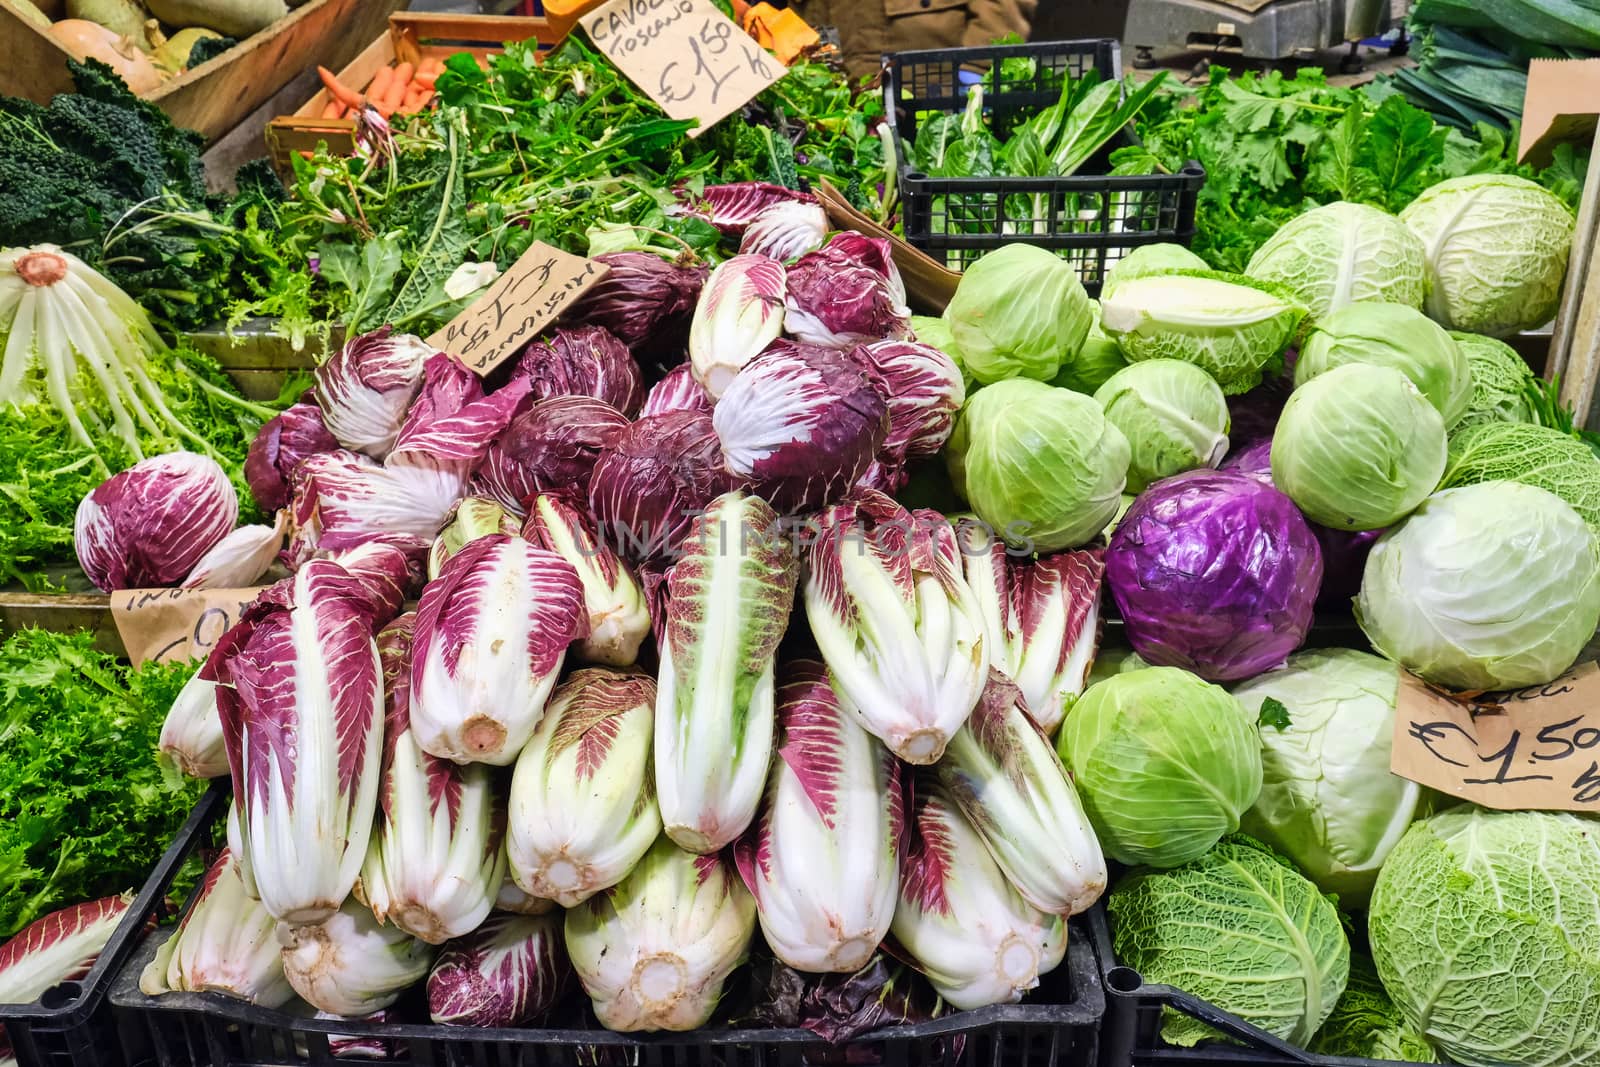 Radicchio and other salad for sale at a market in Rome, Italy